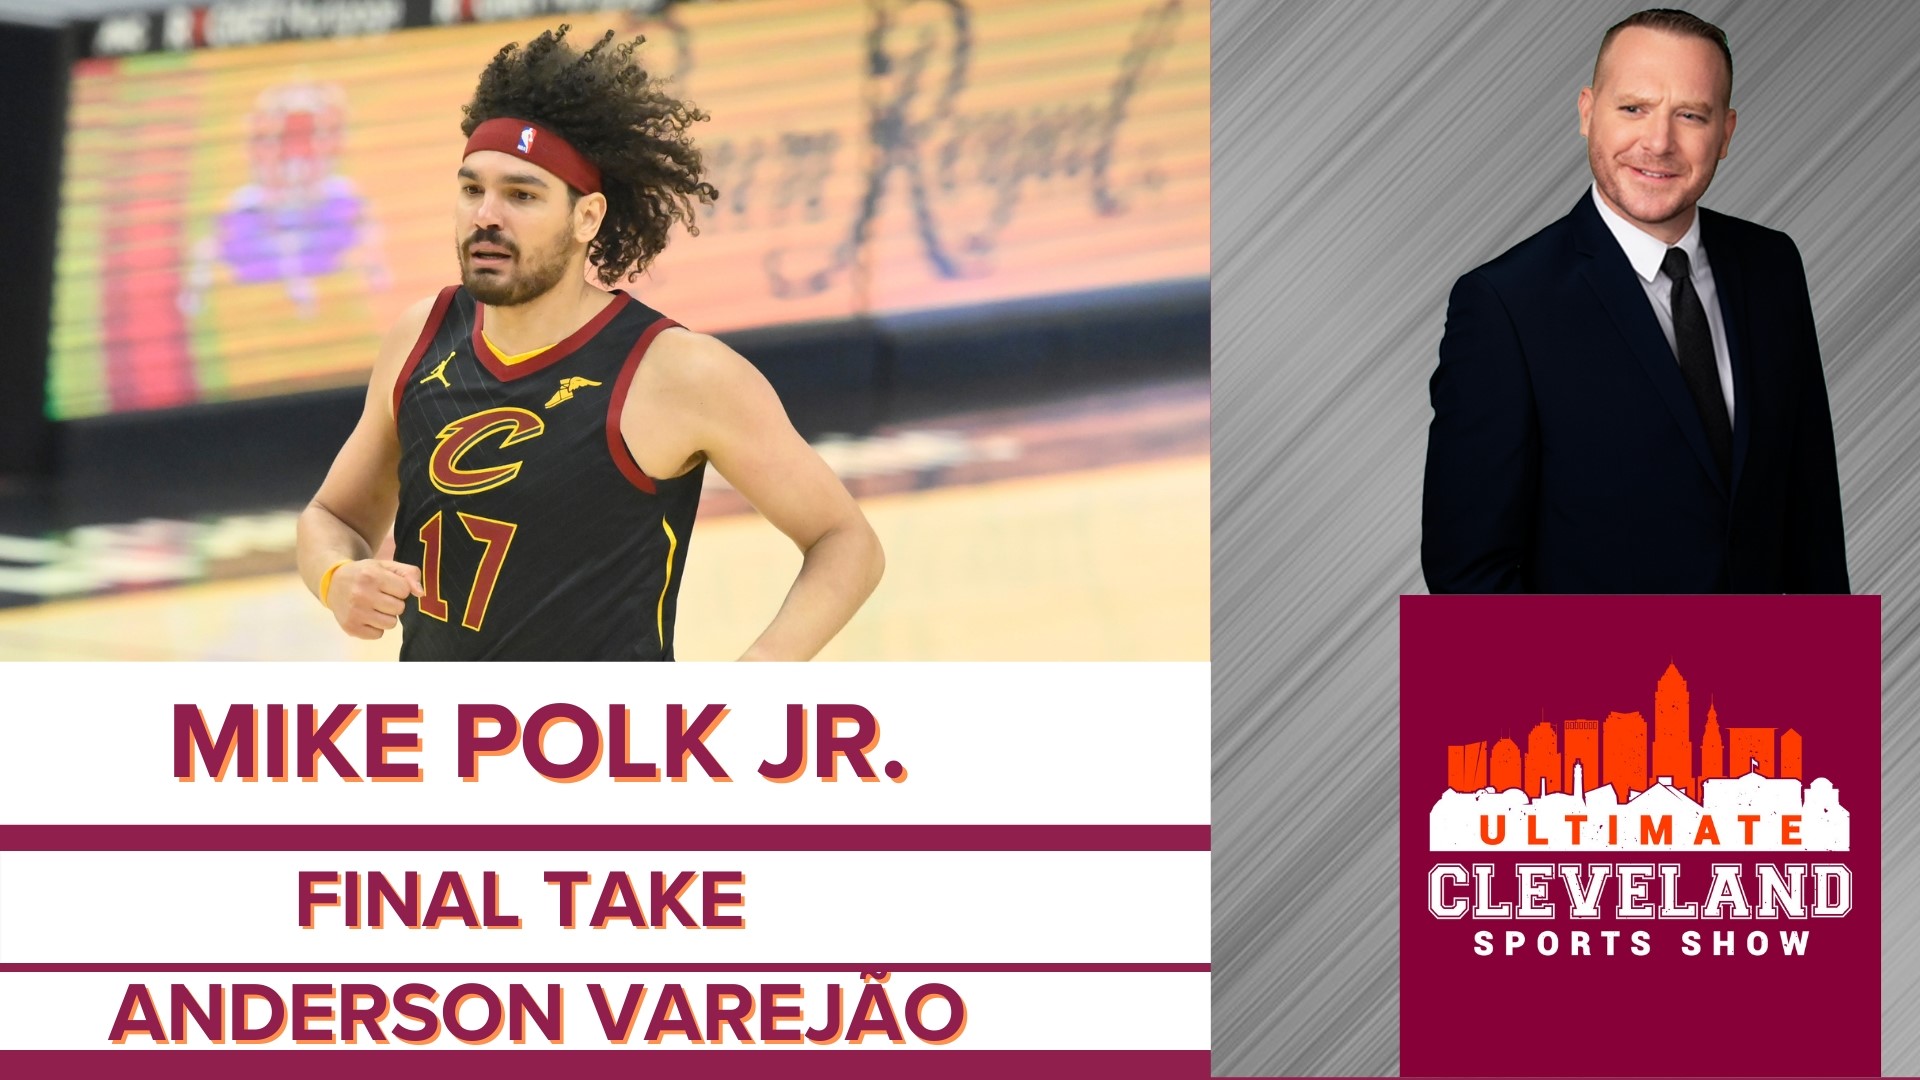 Mike Polk Jr. says Anderson Varejão, the Cavs representative at the 2022 NBA Lottery Draft, could have done better and come back with 11 or 12 but not the 14th pick.